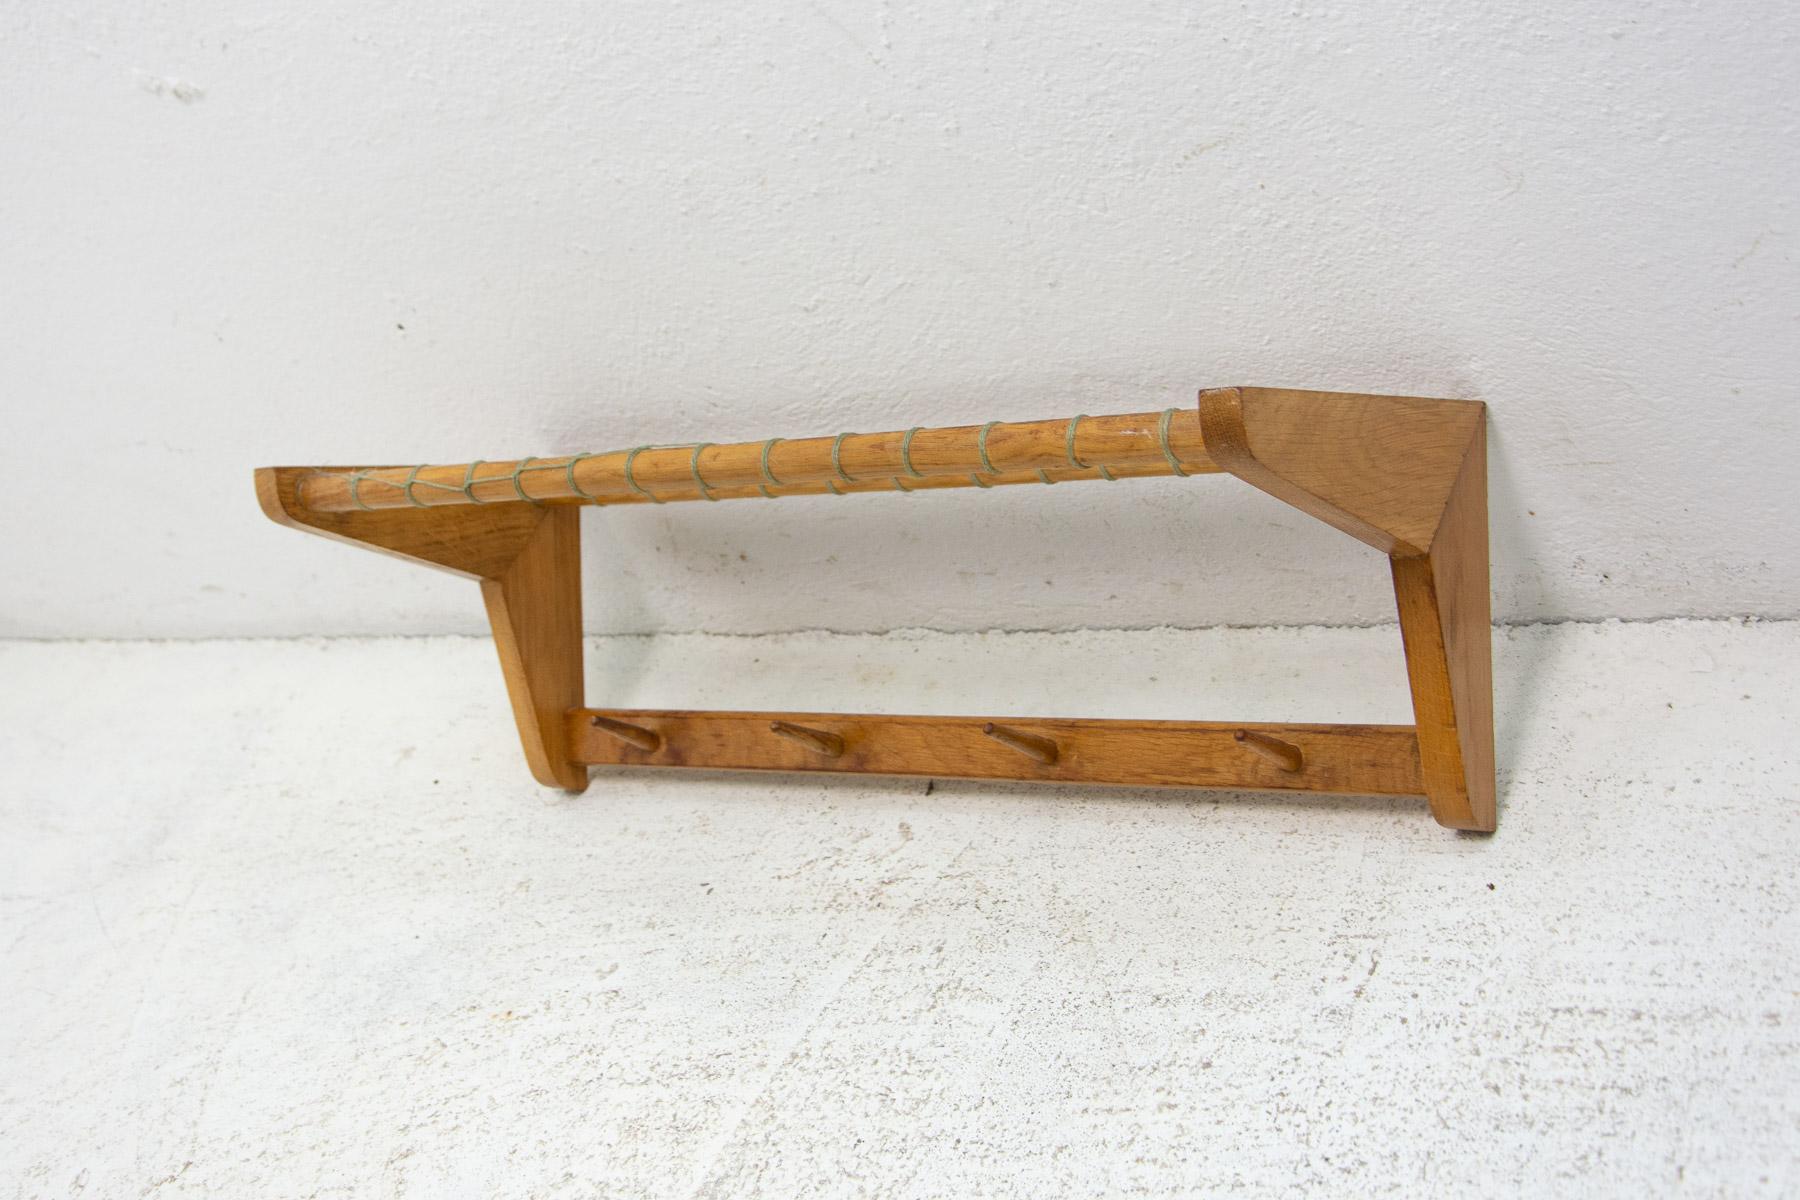 Vintage Wall shelf, made in the former Czechoslovakia in the 1960´s. It was produced by Krásná Jizba company. It’s made of beech wood and an intertwined upper part. In very good Vintage condition.

Measures: Height: 20 cm

Lenght: 60